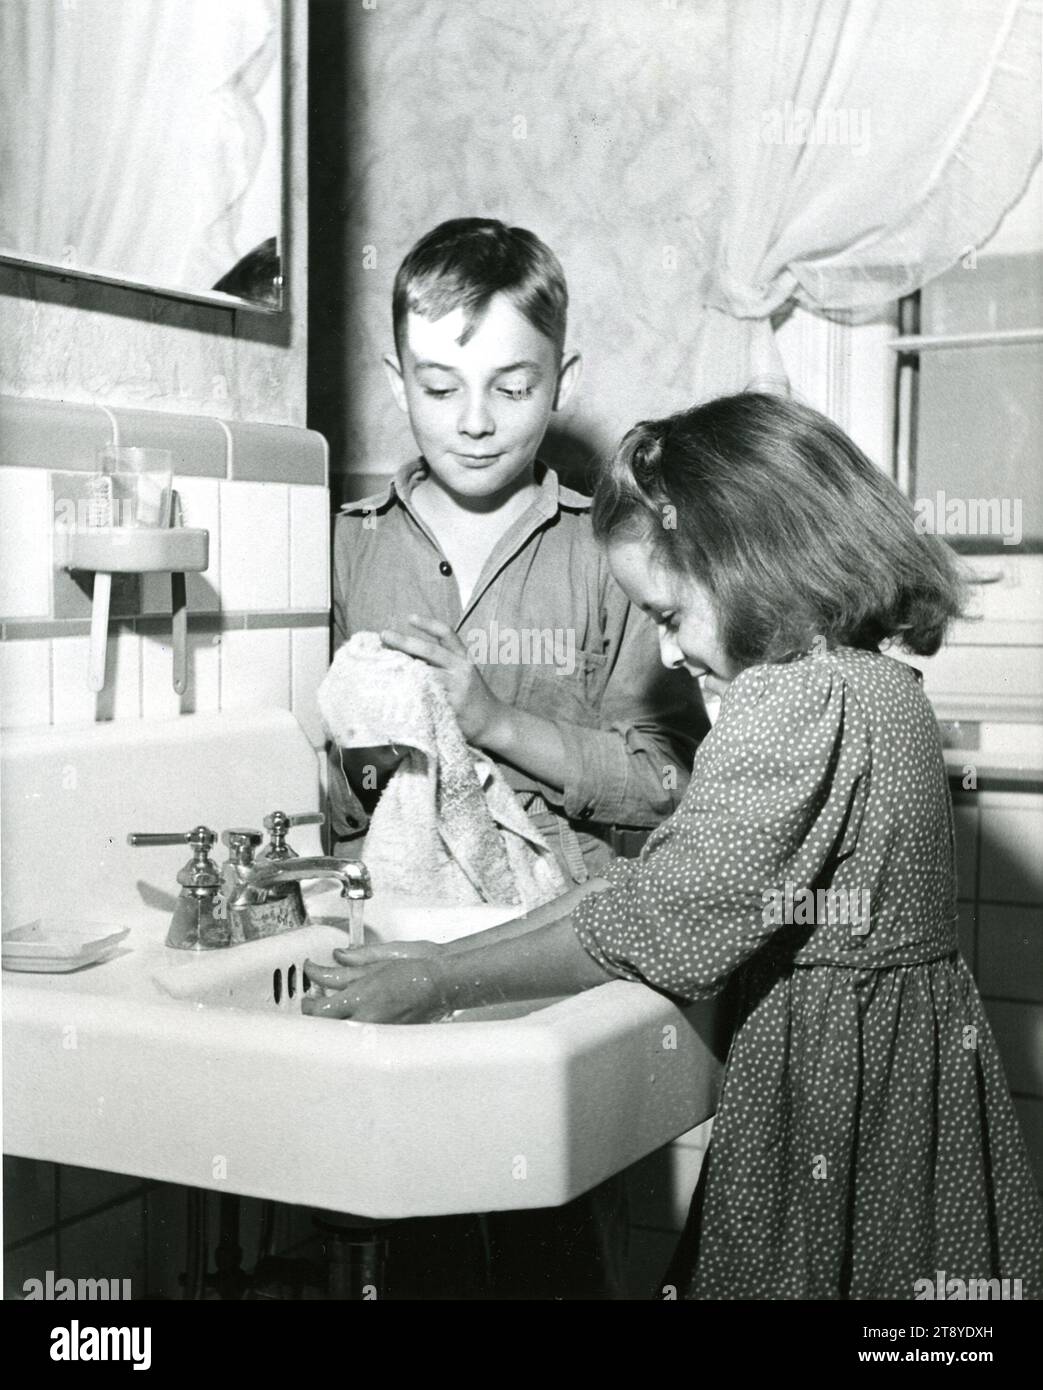 Tennessee, 1961 - Children in a farm house electrified under the Tennessee Valley Authority (TVA) program enjoy the advantages of indoor plumbing. Electricity, in addition to supplying water indoors and out, heats water, provides better lighting, refrigerates milk and other foods, and powers a variety of labor-saving farm machines. Tennessee, circa 1961. Photo by Tennessee Valley Authority/ NARA. Stock Photo